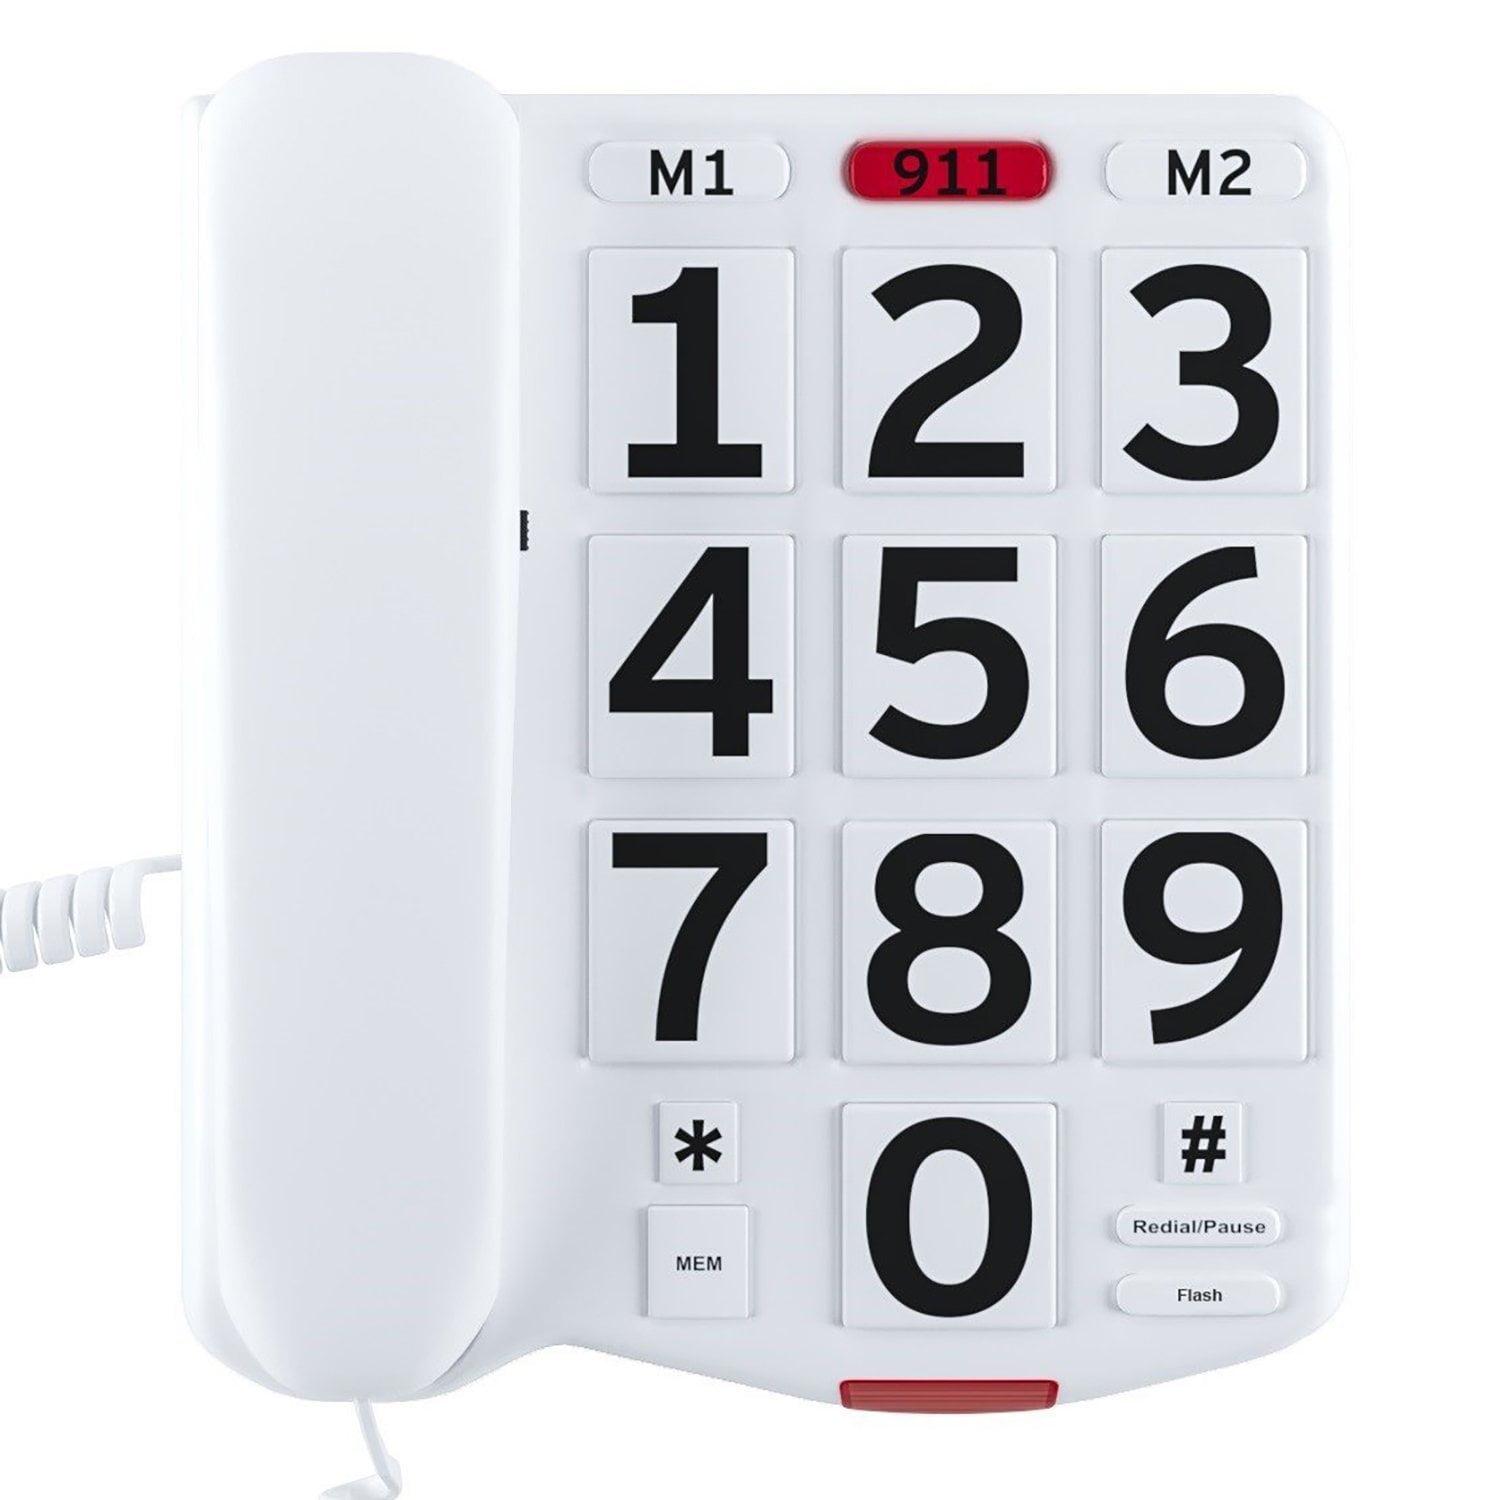 NEW Decor Corded Telephone White Simple To Use And With A Large Display The GIF 